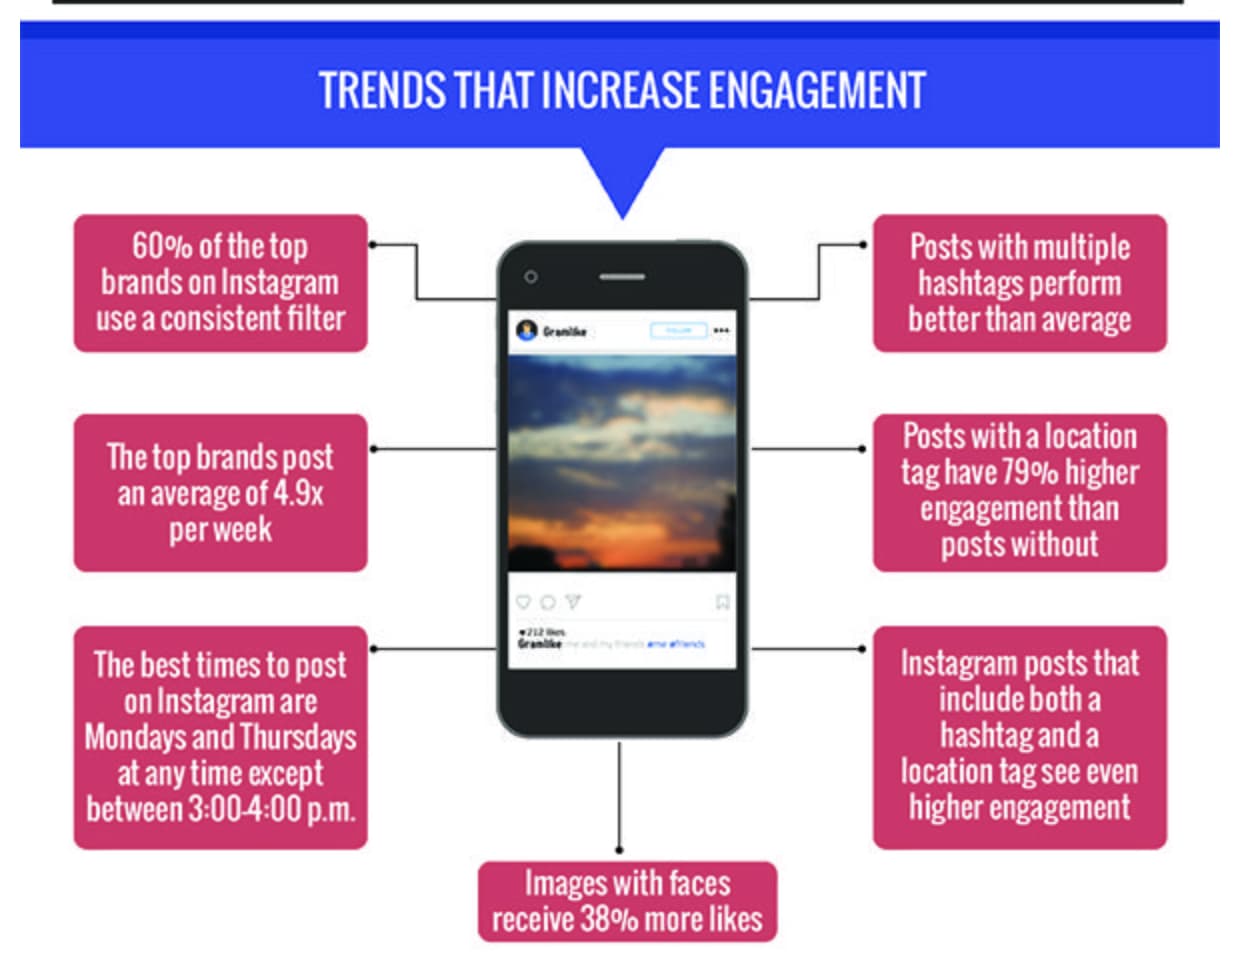 Trends that increase engagement on Instagram